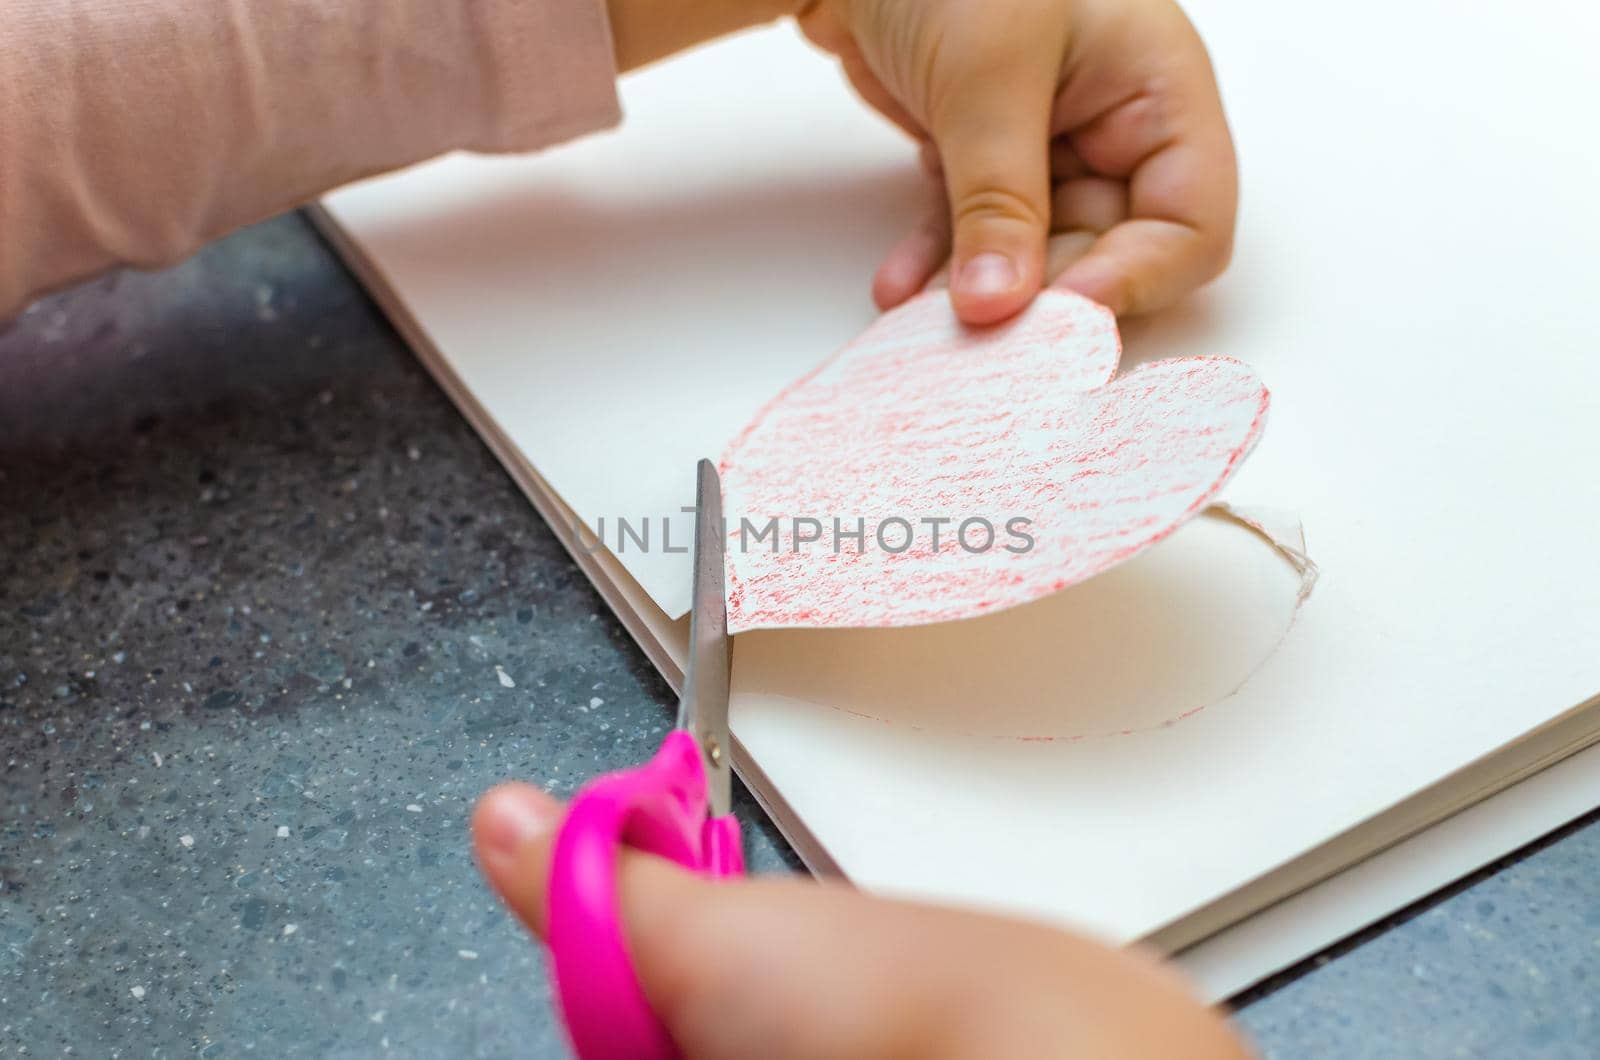 The girl's hand holds a heart cut from paper. Children's creativity - drawings and crafts for Valentine's Day or Mother's Day. by SERSOL